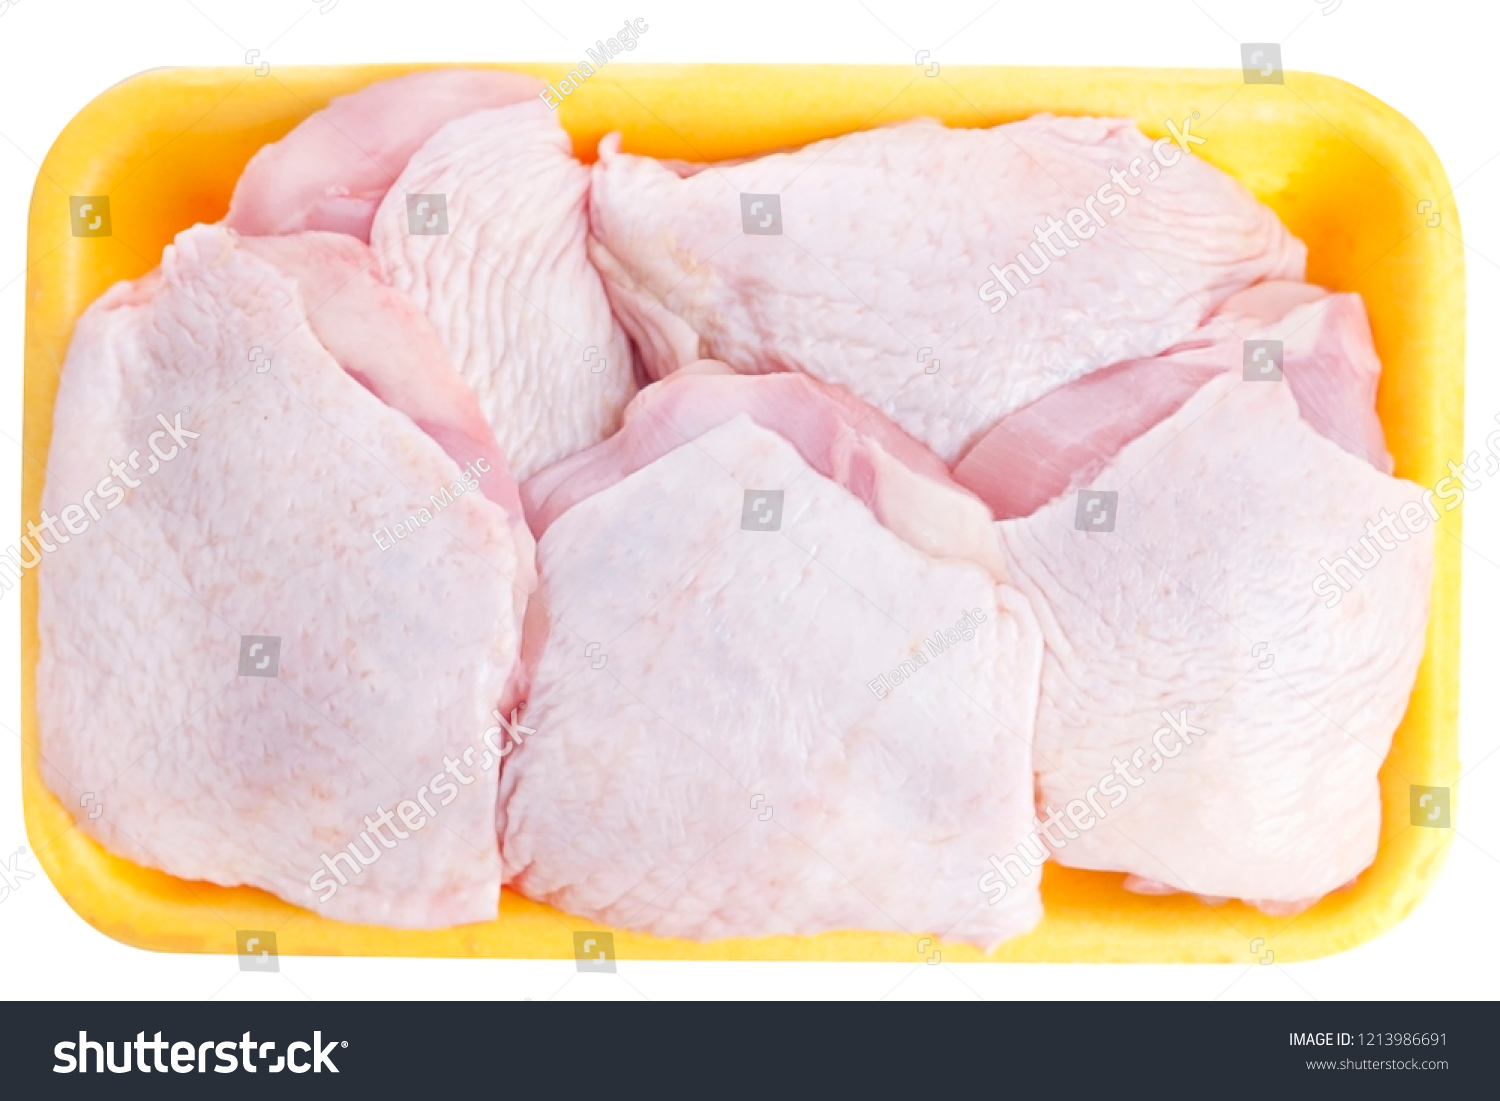 Download Raw Chicken Yellow Plastic Tray Isolated Food And Drink Stock Image 1213986691 Yellowimages Mockups